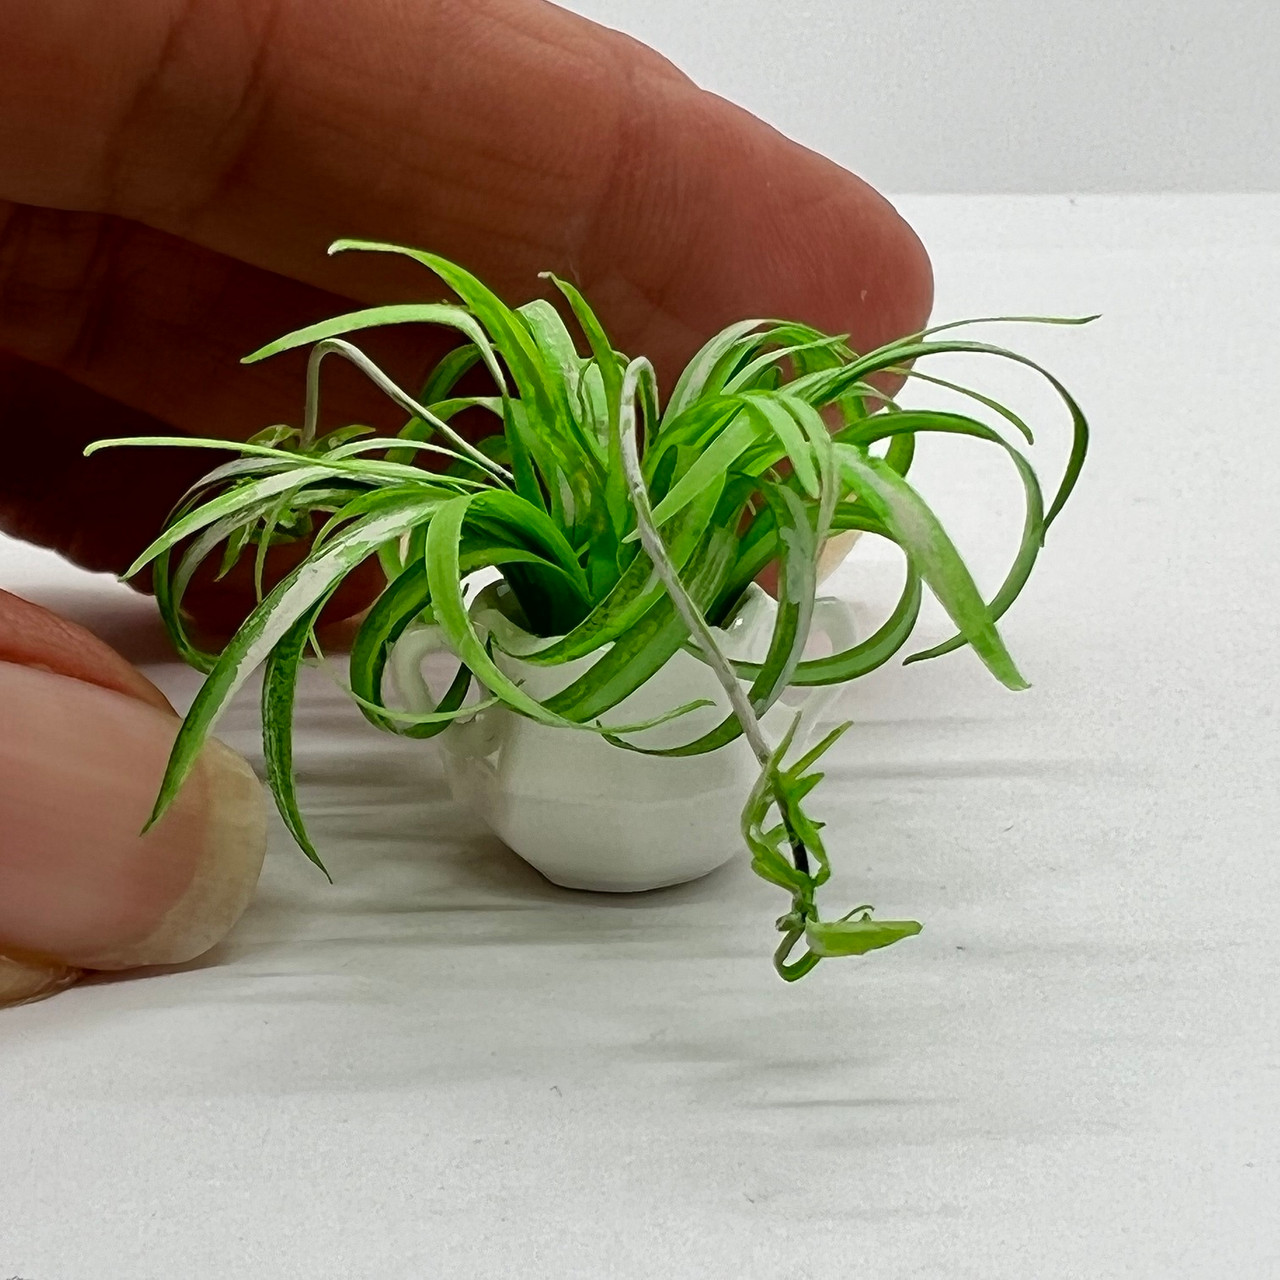 Spider Plant in White Ceramic Pot (UFN3017) shown with hand for scale